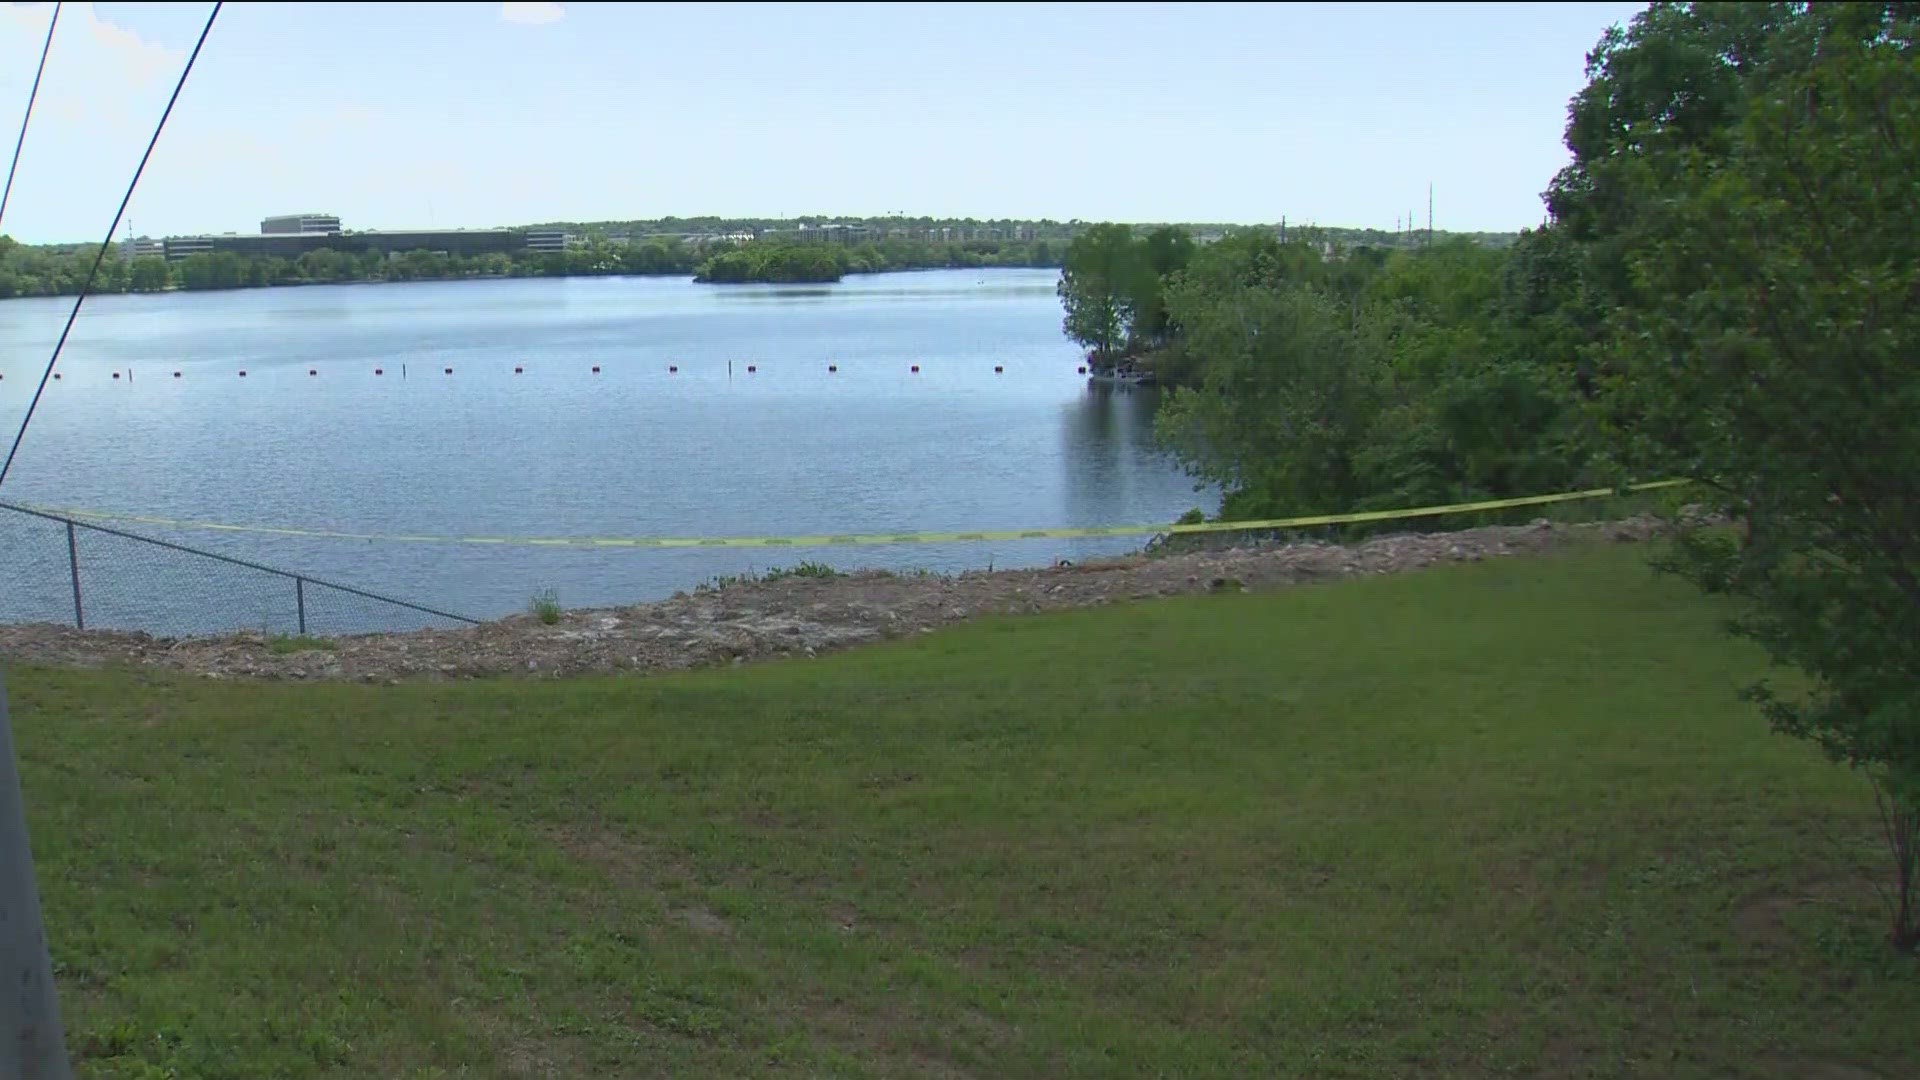 Austin police have identified the body recovered near Longhorn Dam in Lady Bird Lake on Saturday.